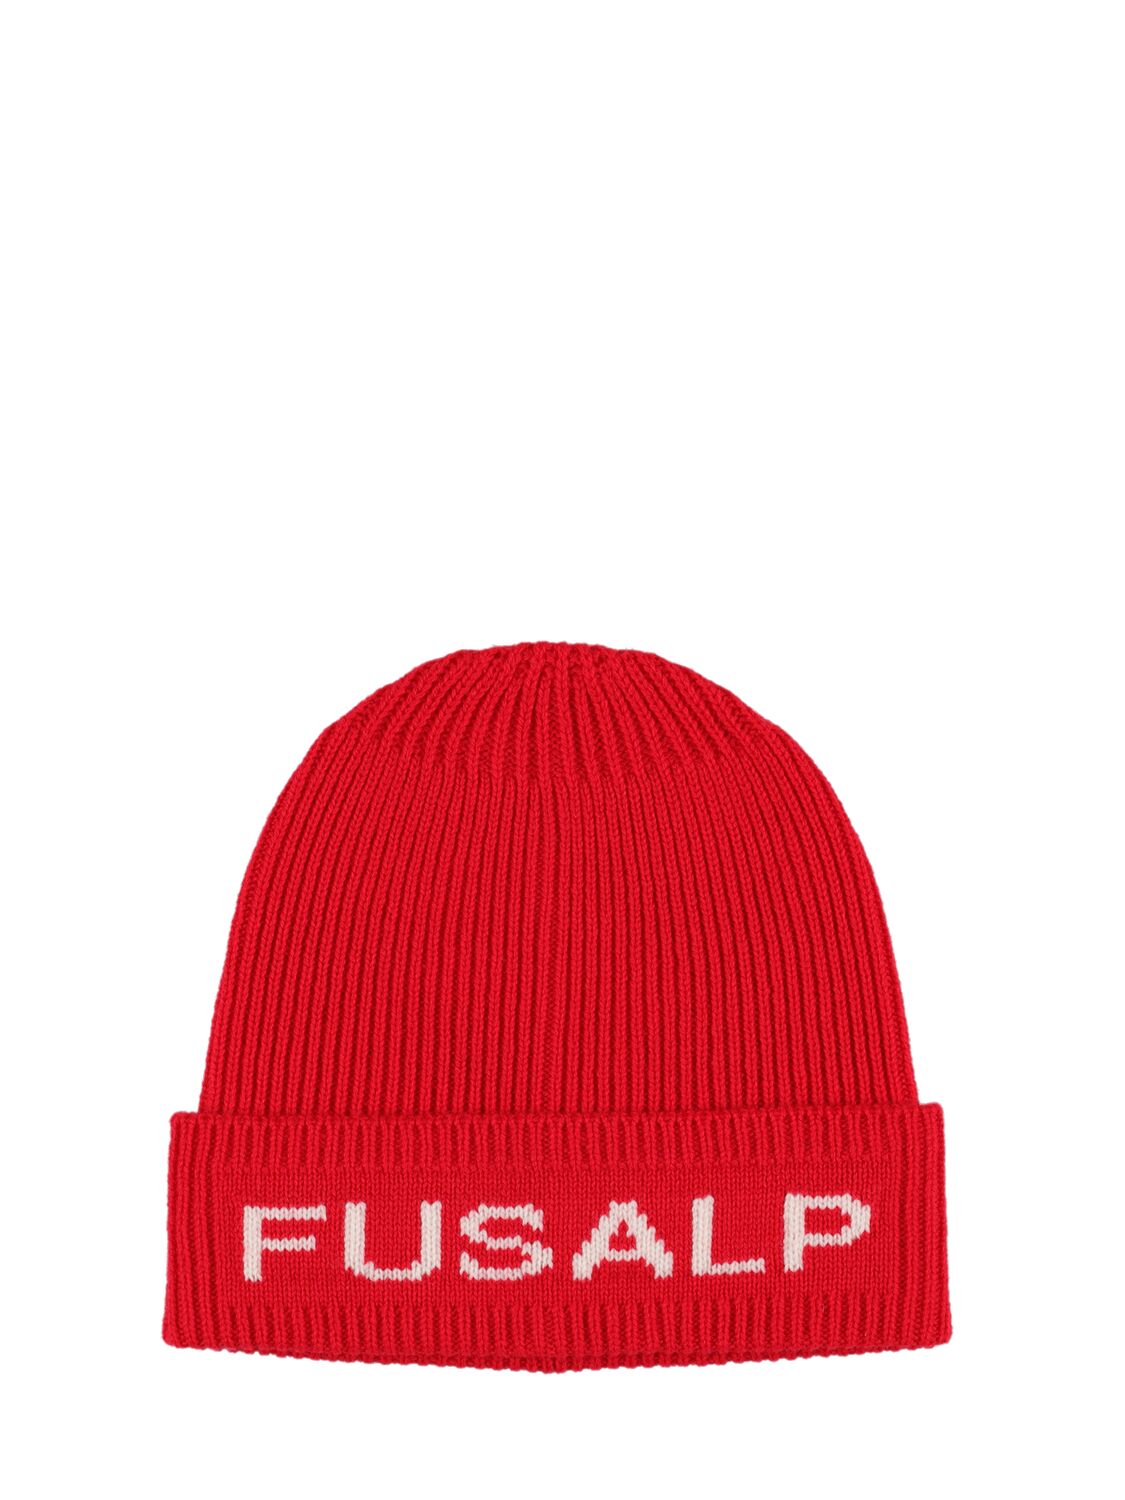 Image of Fully Wool & Cashmere Beanie